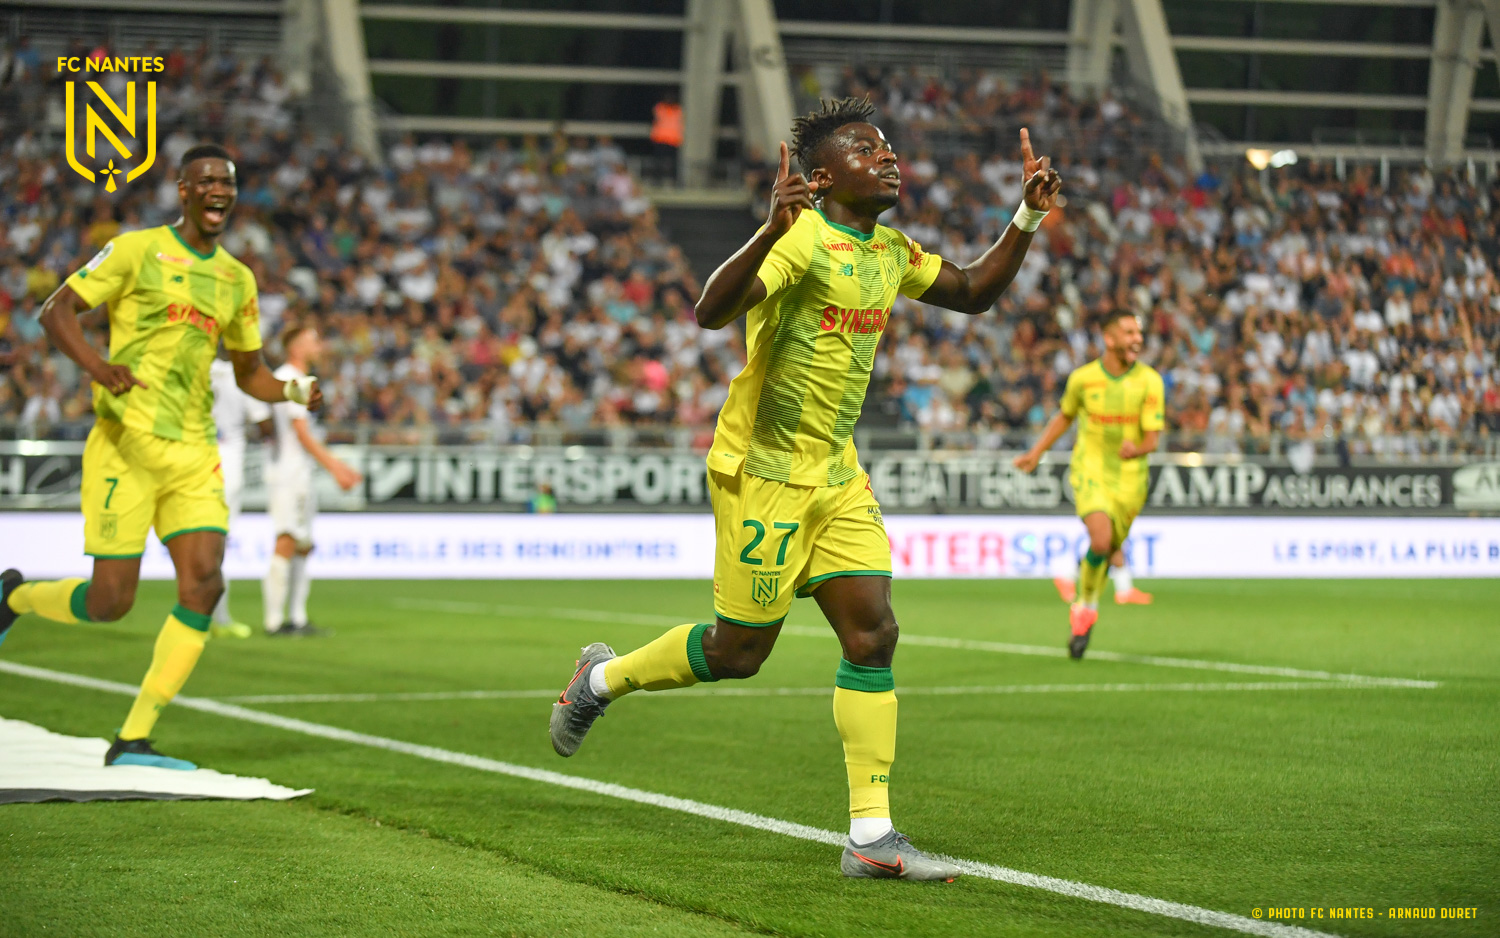 Simon Delighted To Make Winning Debut With FC Nantes